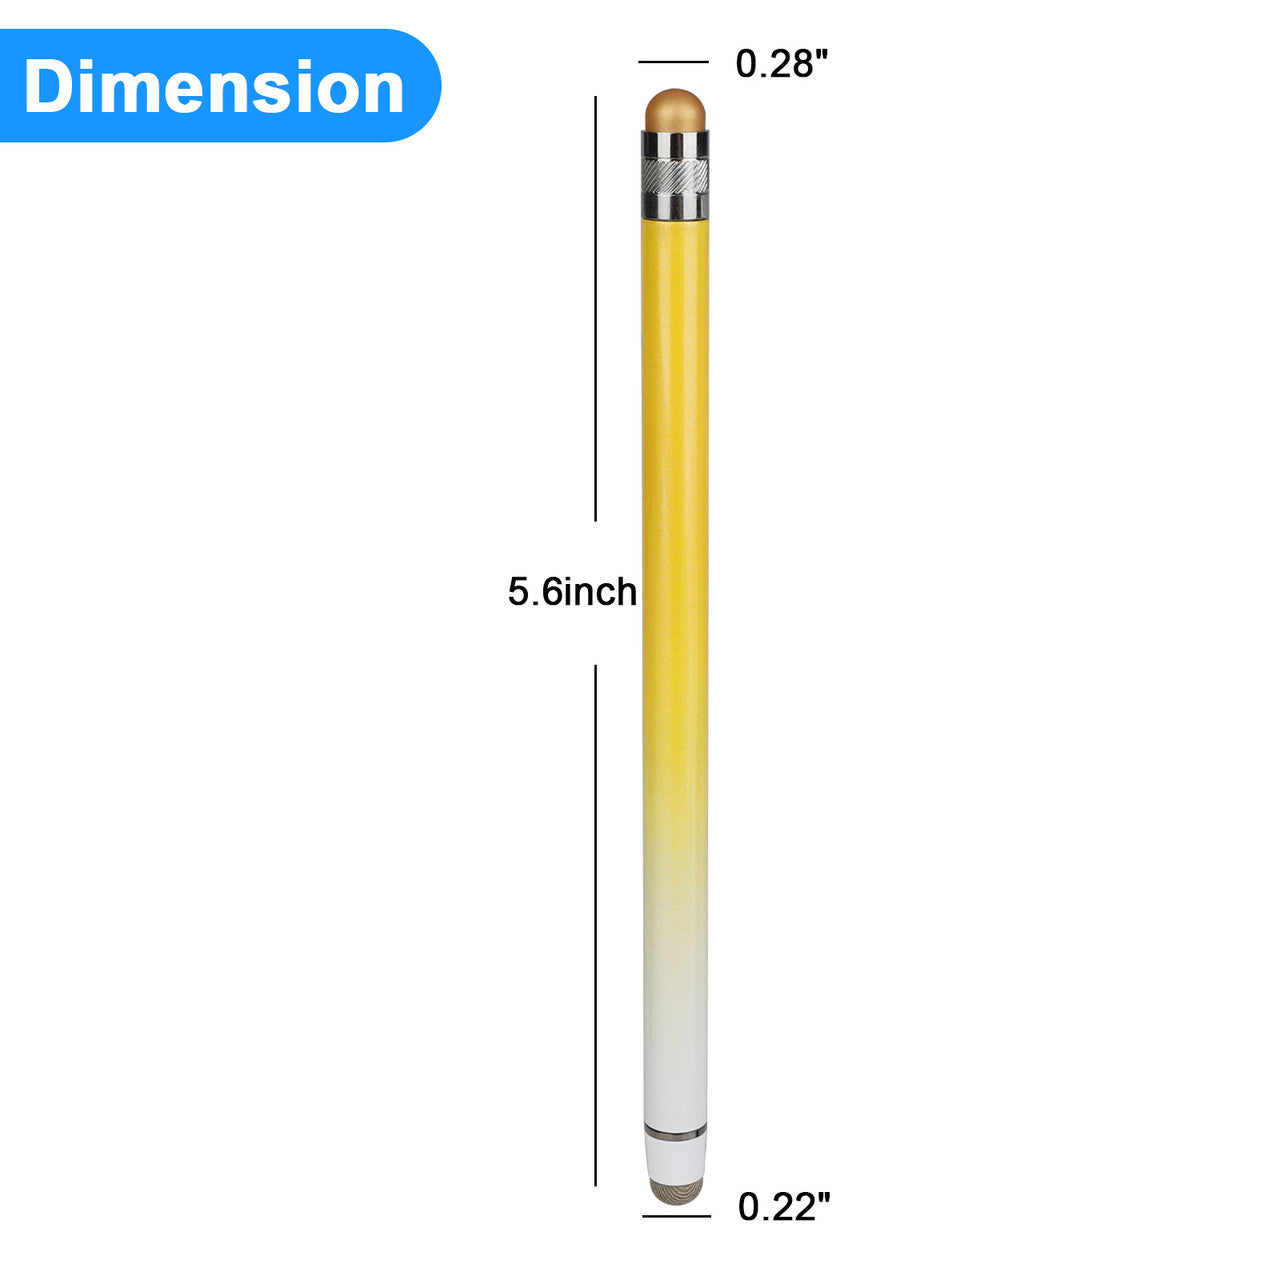 Stylus with High-Sensivity Fiber Tip / Stylus Dual-tip Universal Touchscreen Pen with 8 Extra Replaceable Fiber Tips (white pink purpe yellow)